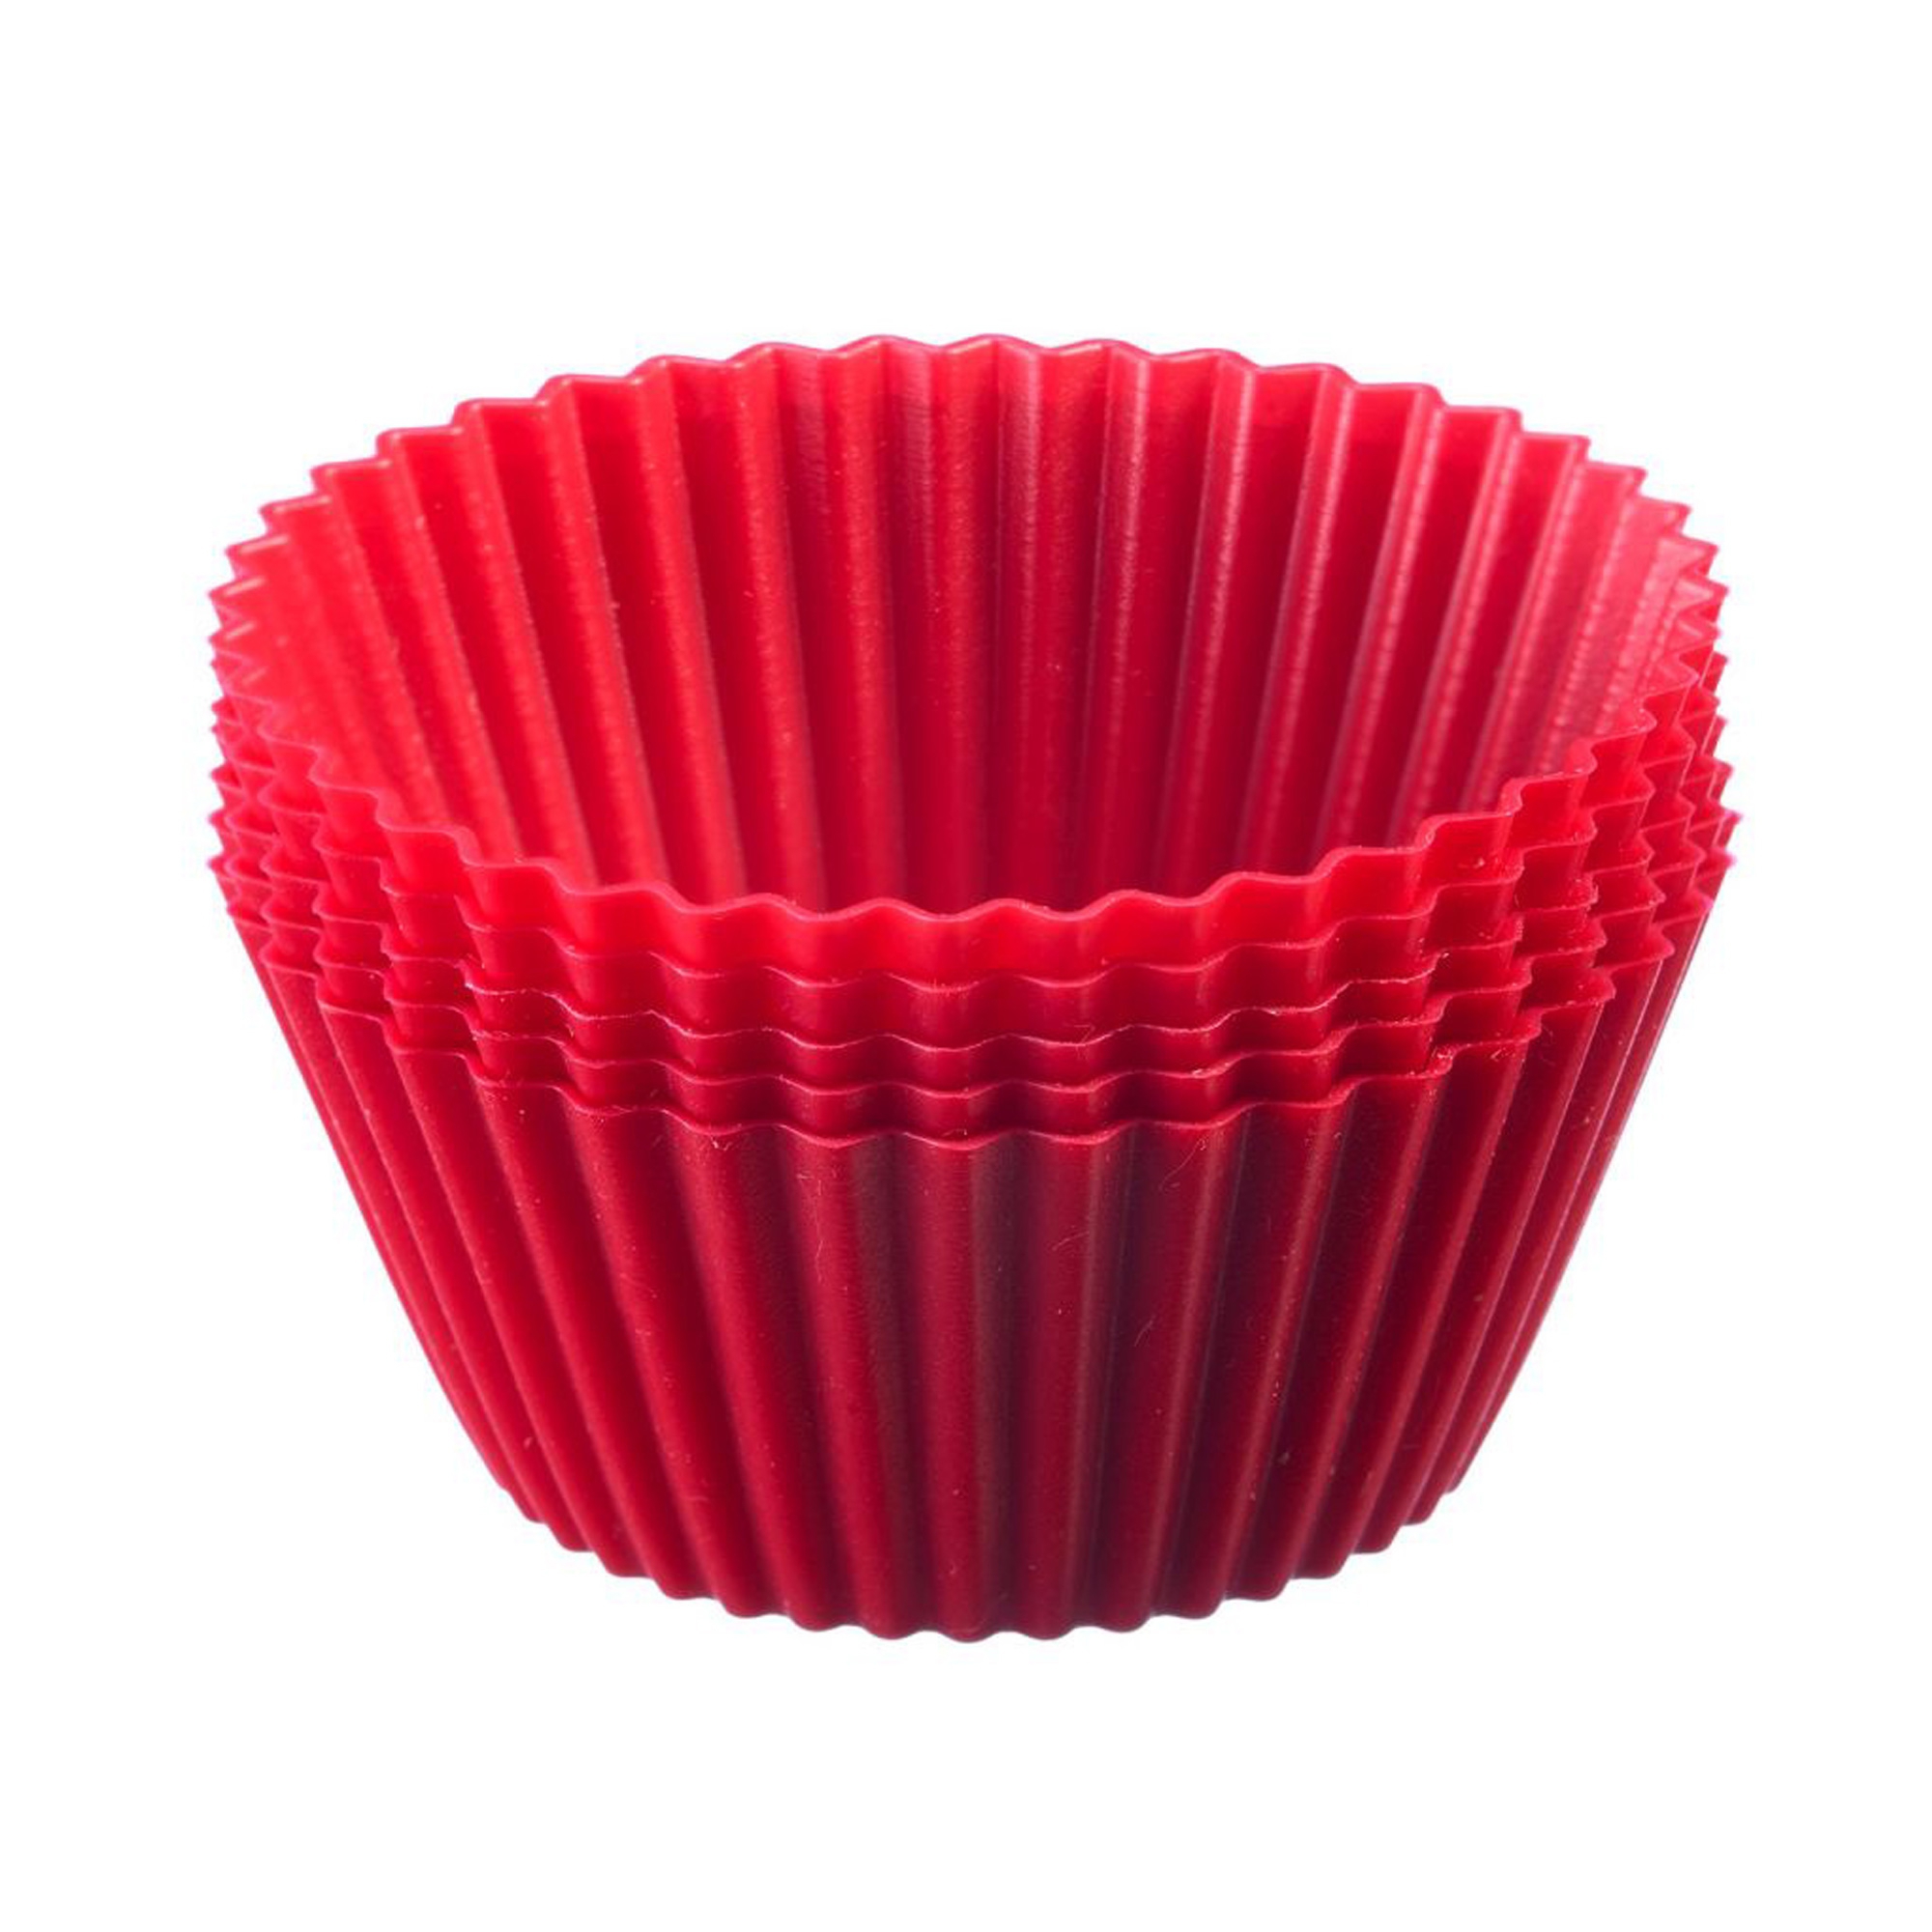 Westmark - 6 silicone muffin moulds, ø 7 cm, red